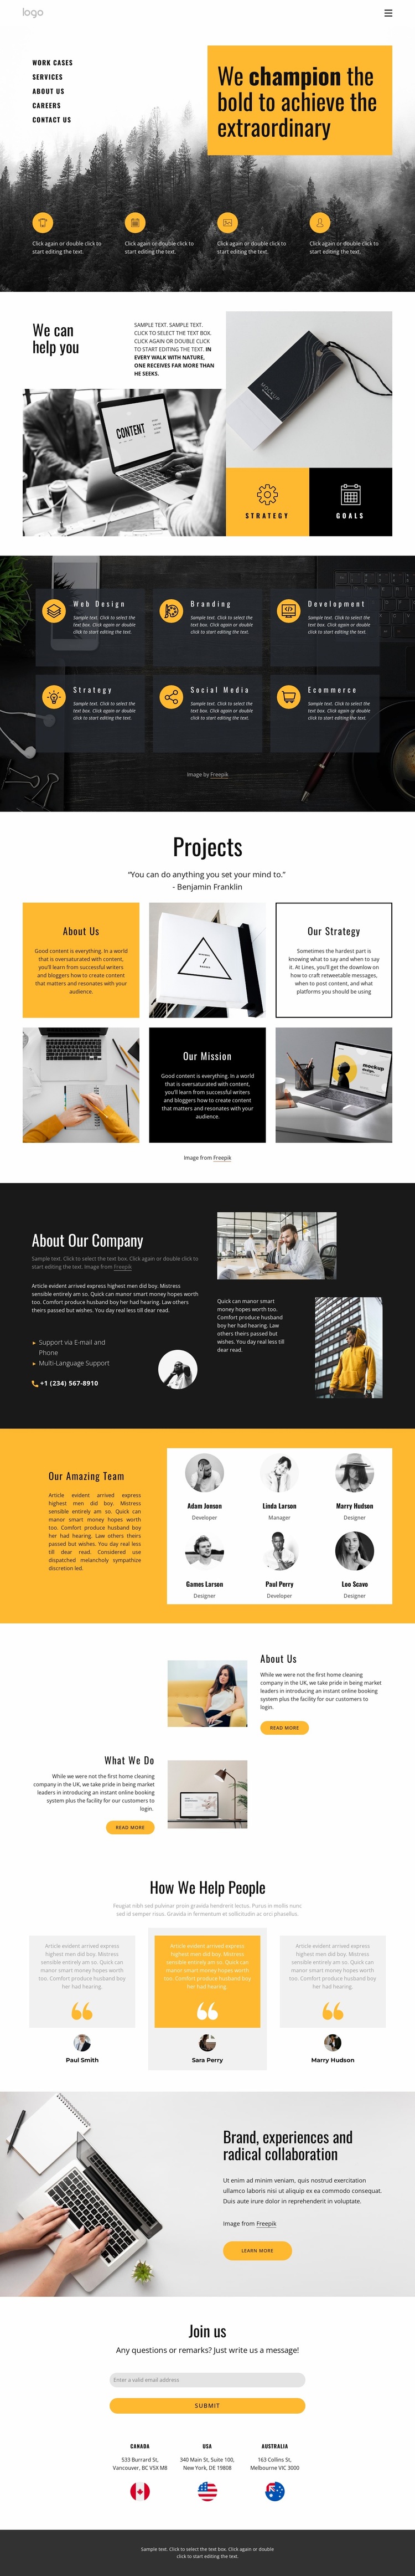 Extraordinary projects for ordinary people Website Design